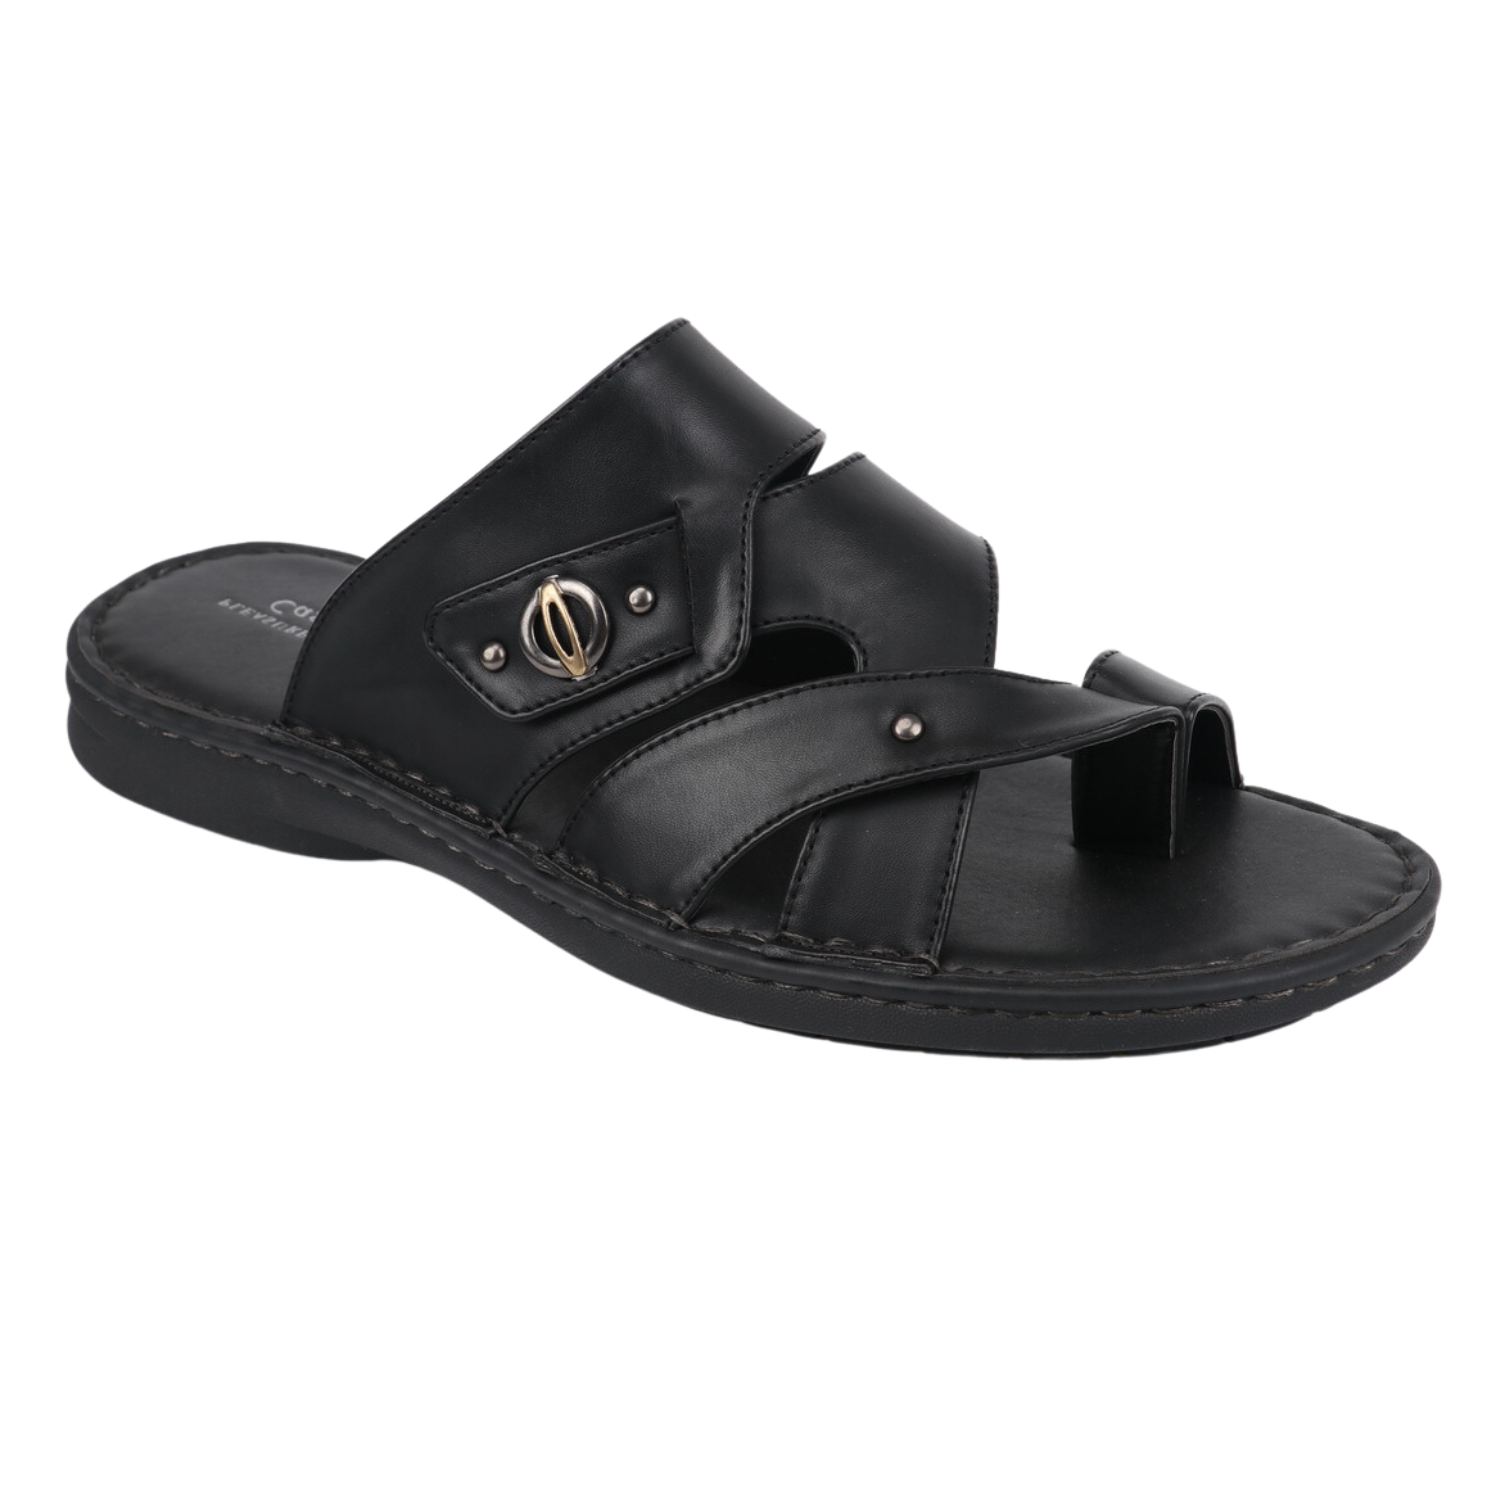 PARAGON Slippers Price in India - Buy PARAGON Slippers online at Shopsy.in